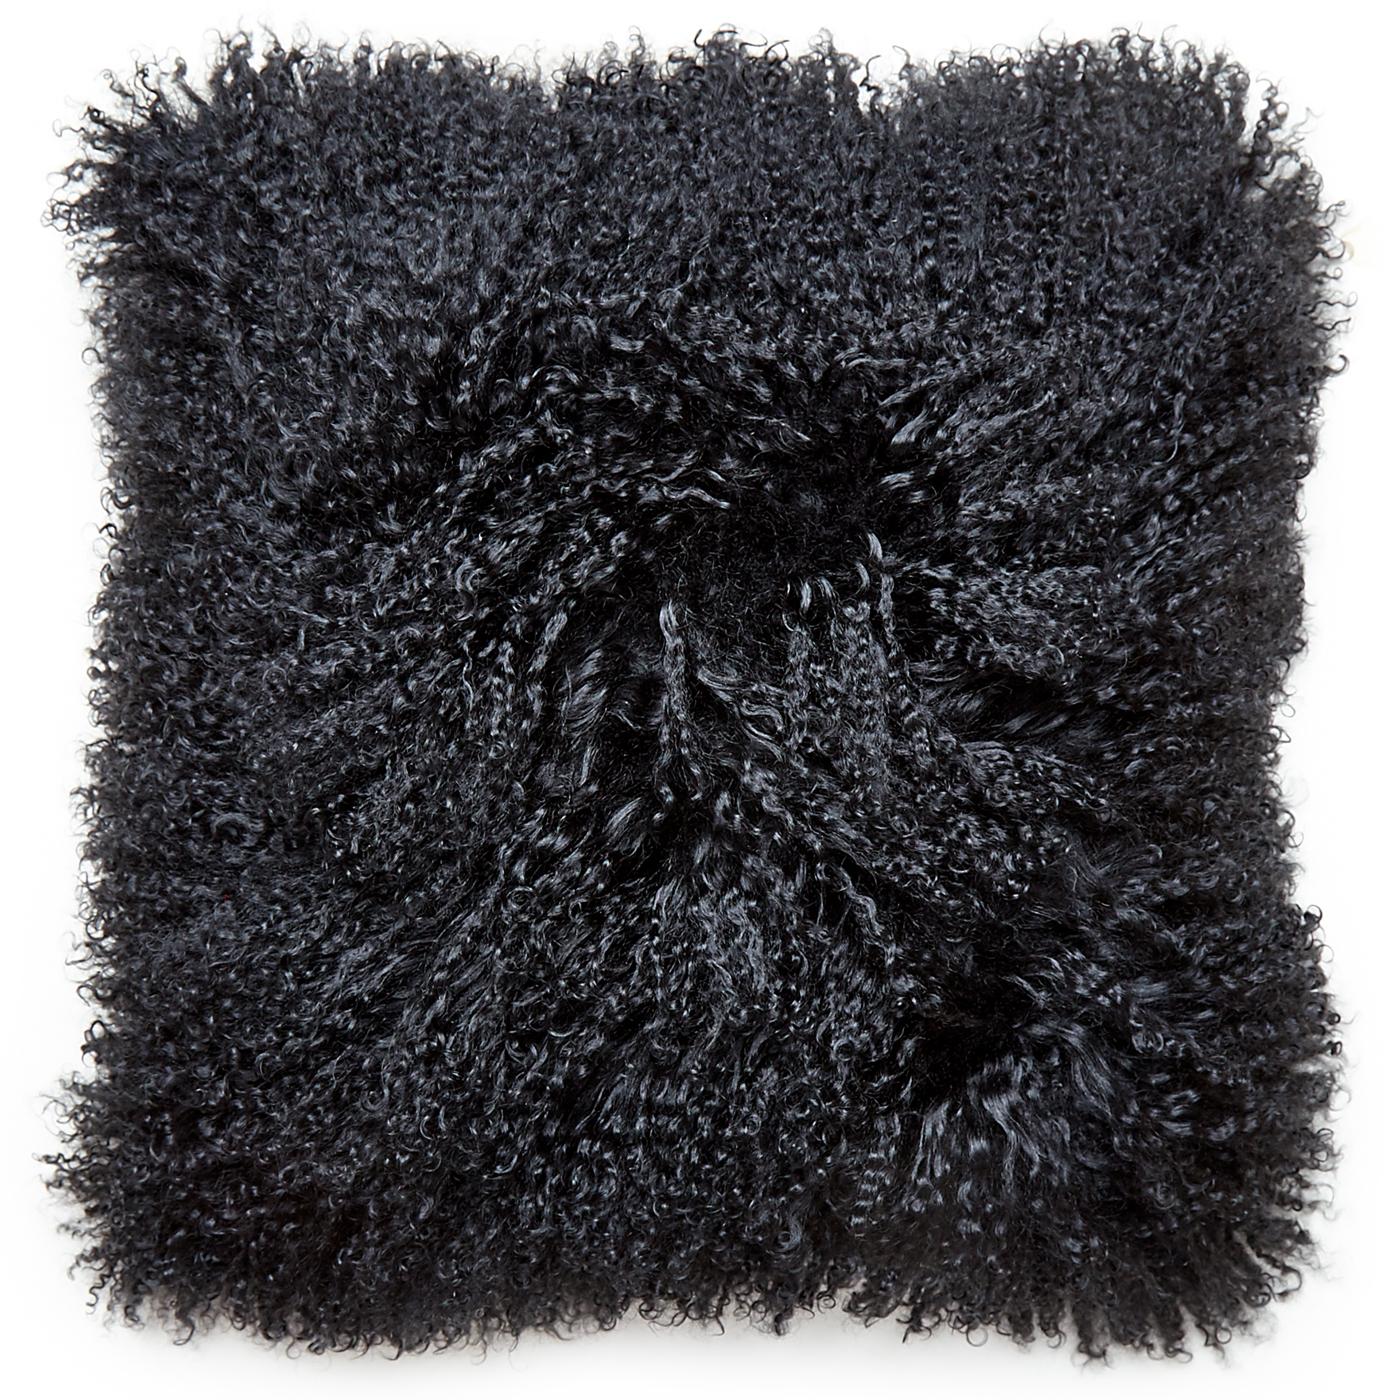 Trippy texture. Made from luxe Mongolian sheep fur, this pair of two pillows will add soft-focus glamour to your sofa or bedscape. Chic up your chalet, perk up your penthouse, or stylize your studio.

Specs:
100% Mongolian lamb hair face
100%